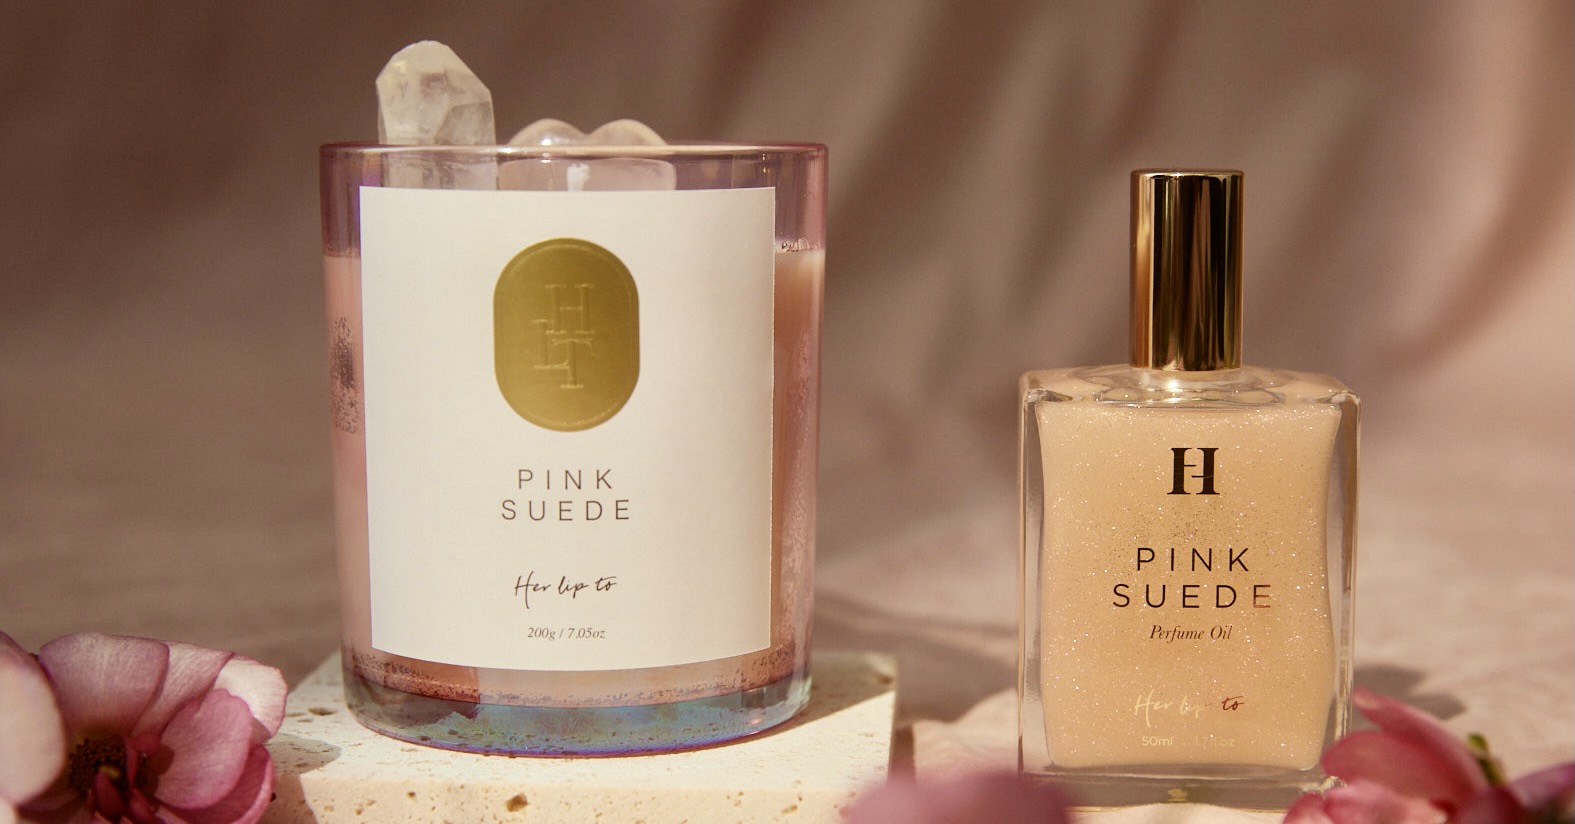 【her lip to】Perfume Oil - PINK SUEDE -